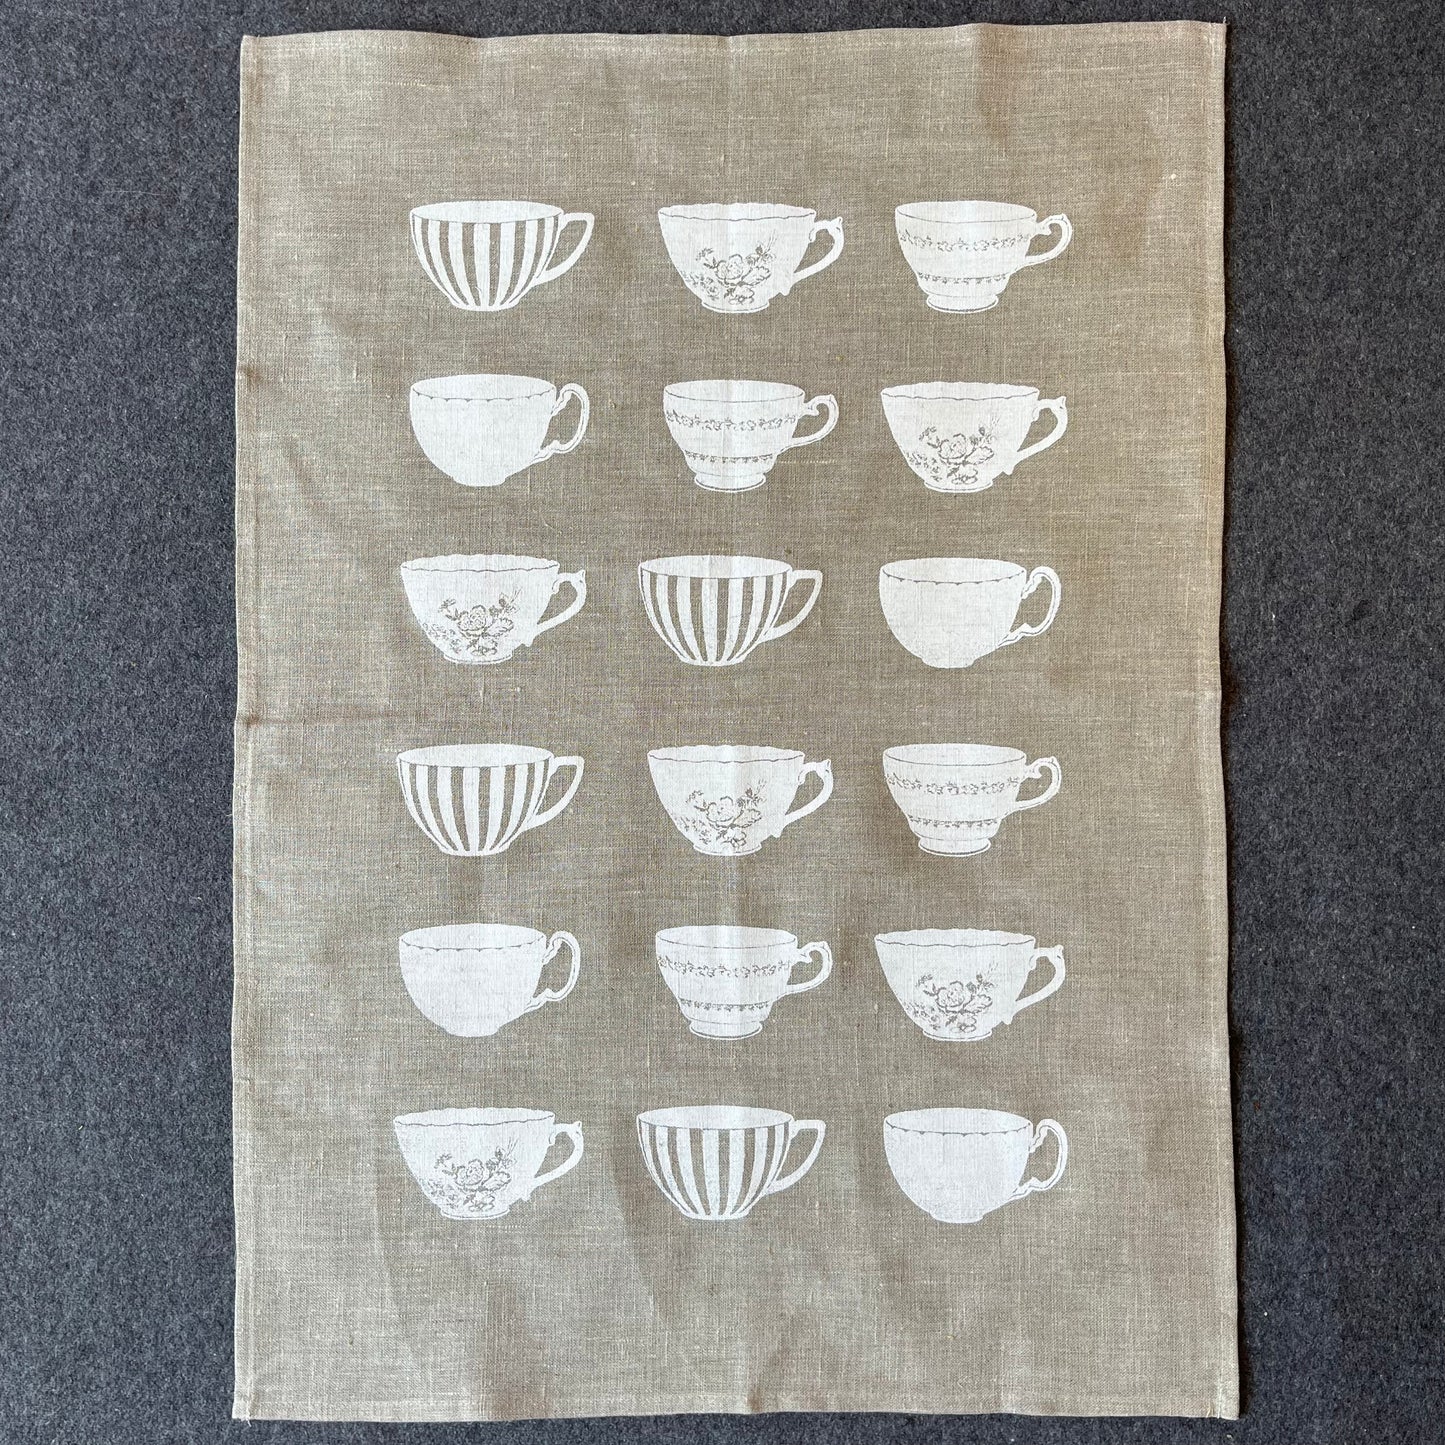 Crown and Feathers Feathers Linen Tea Towel  Tea Cups